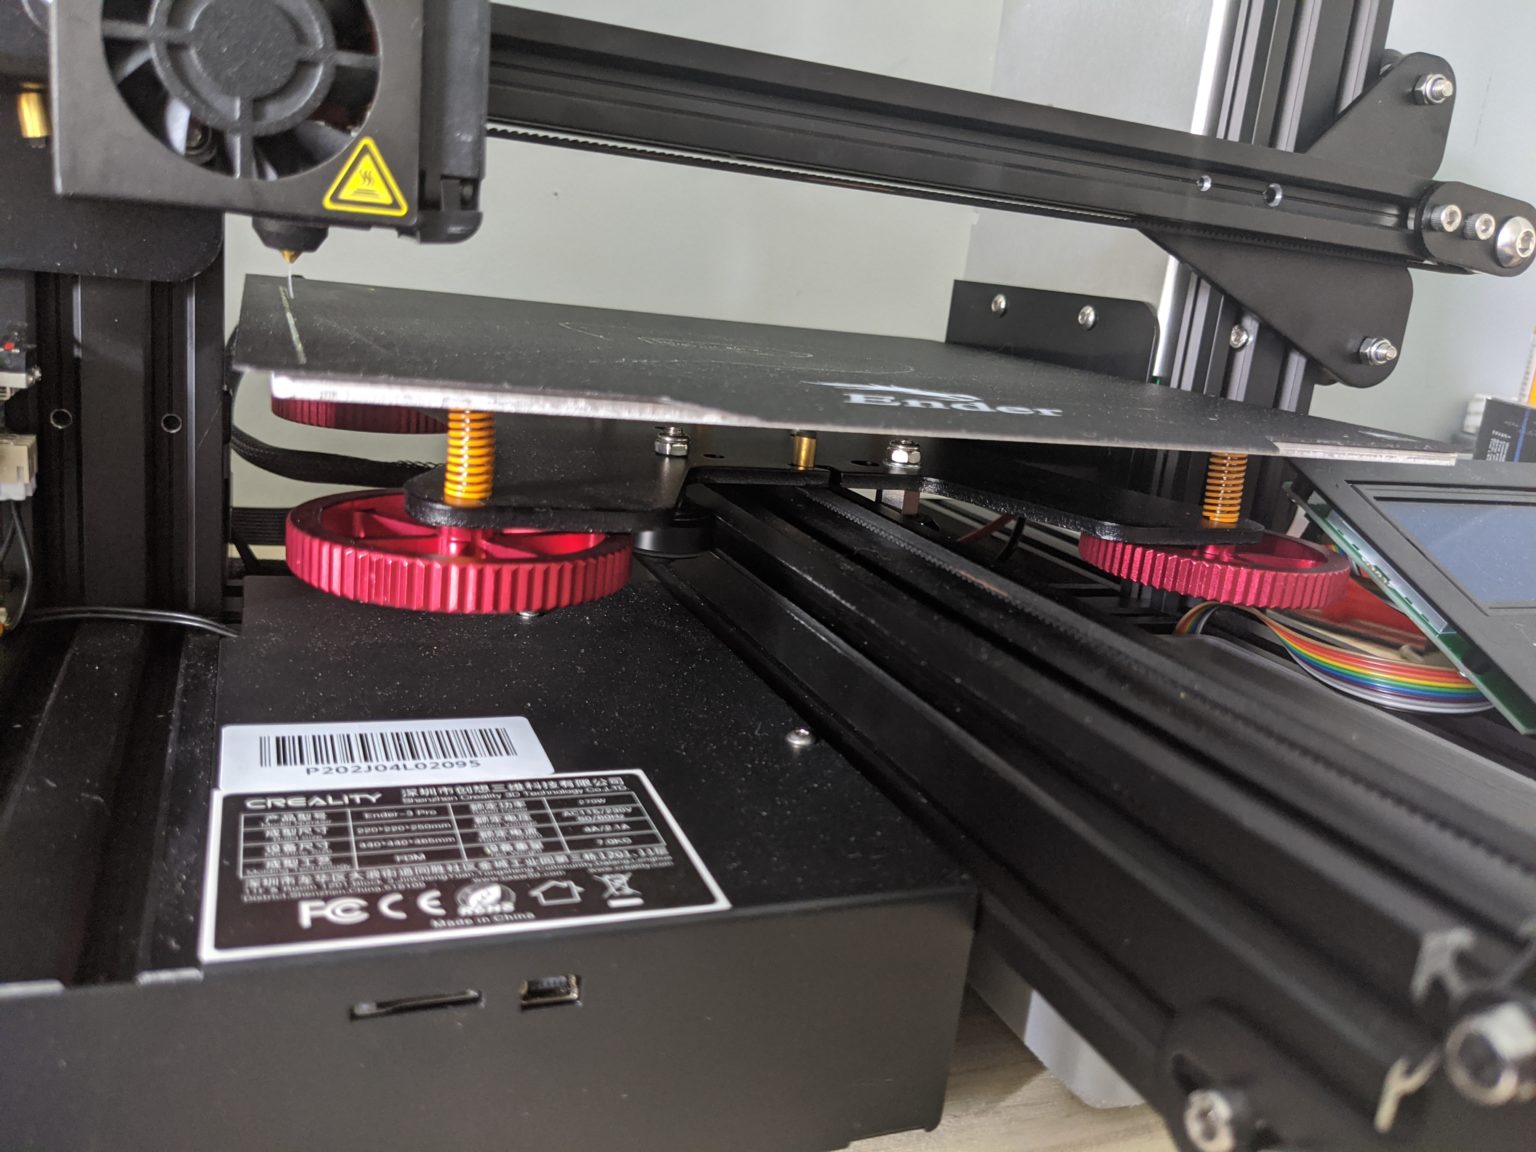 Ender 3 Pro Upgraded Bed Leveling - IMG 20200530 130521 MP 1536x1152